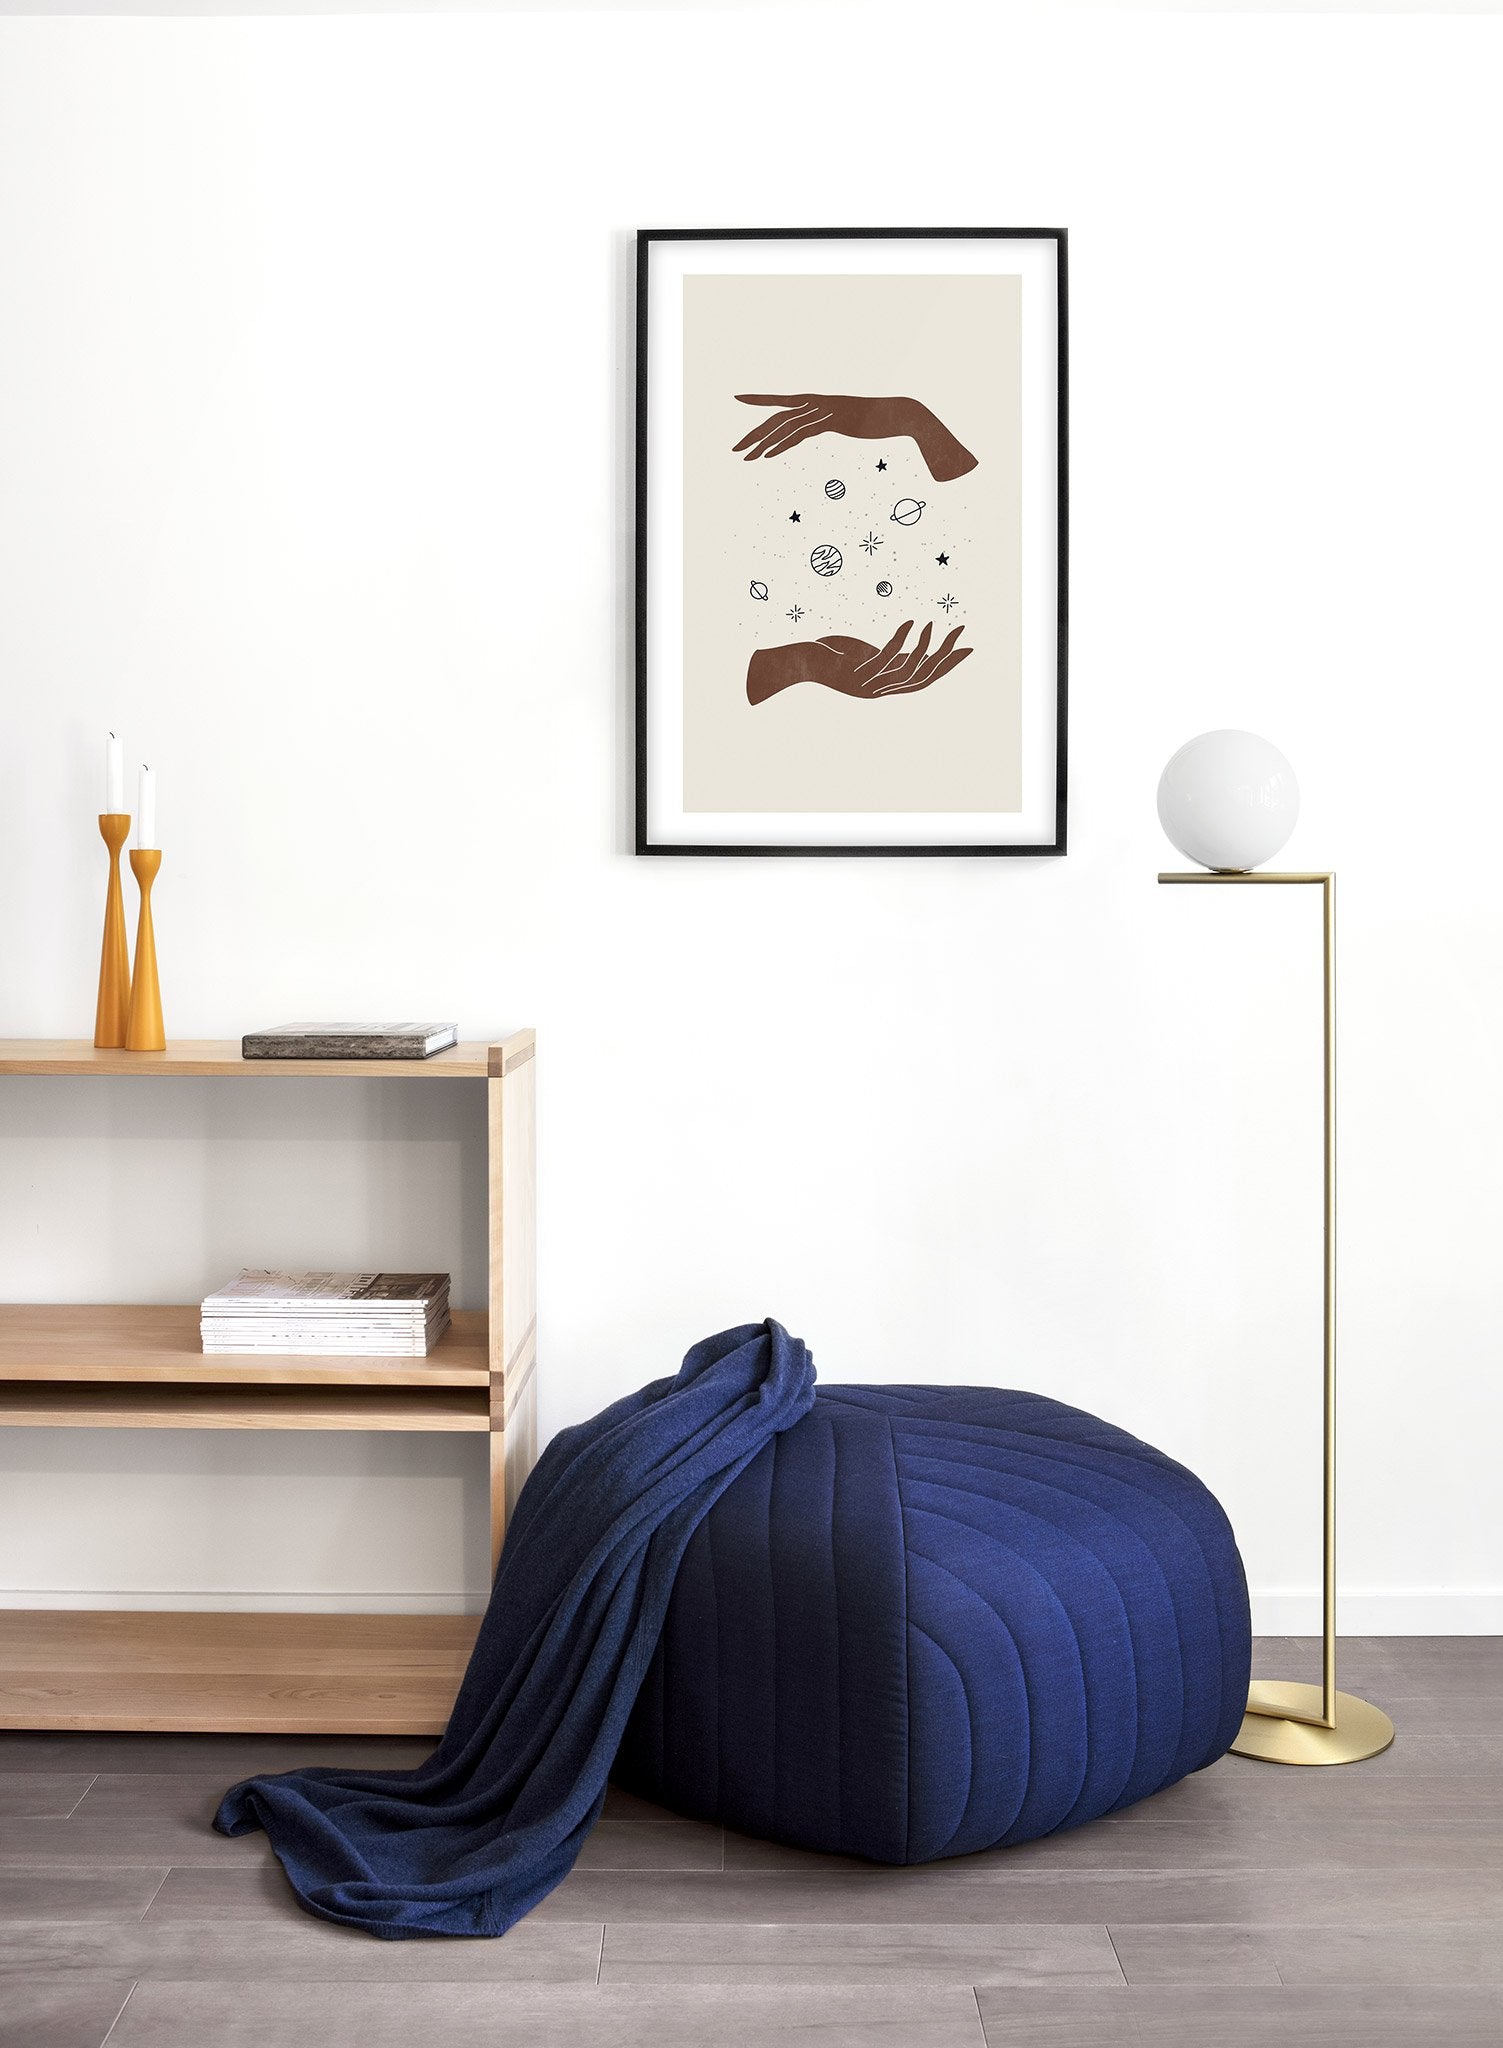 Celestial illustration poster by Opposite Wall with hands holding the universe - Lifestyle - Living Room